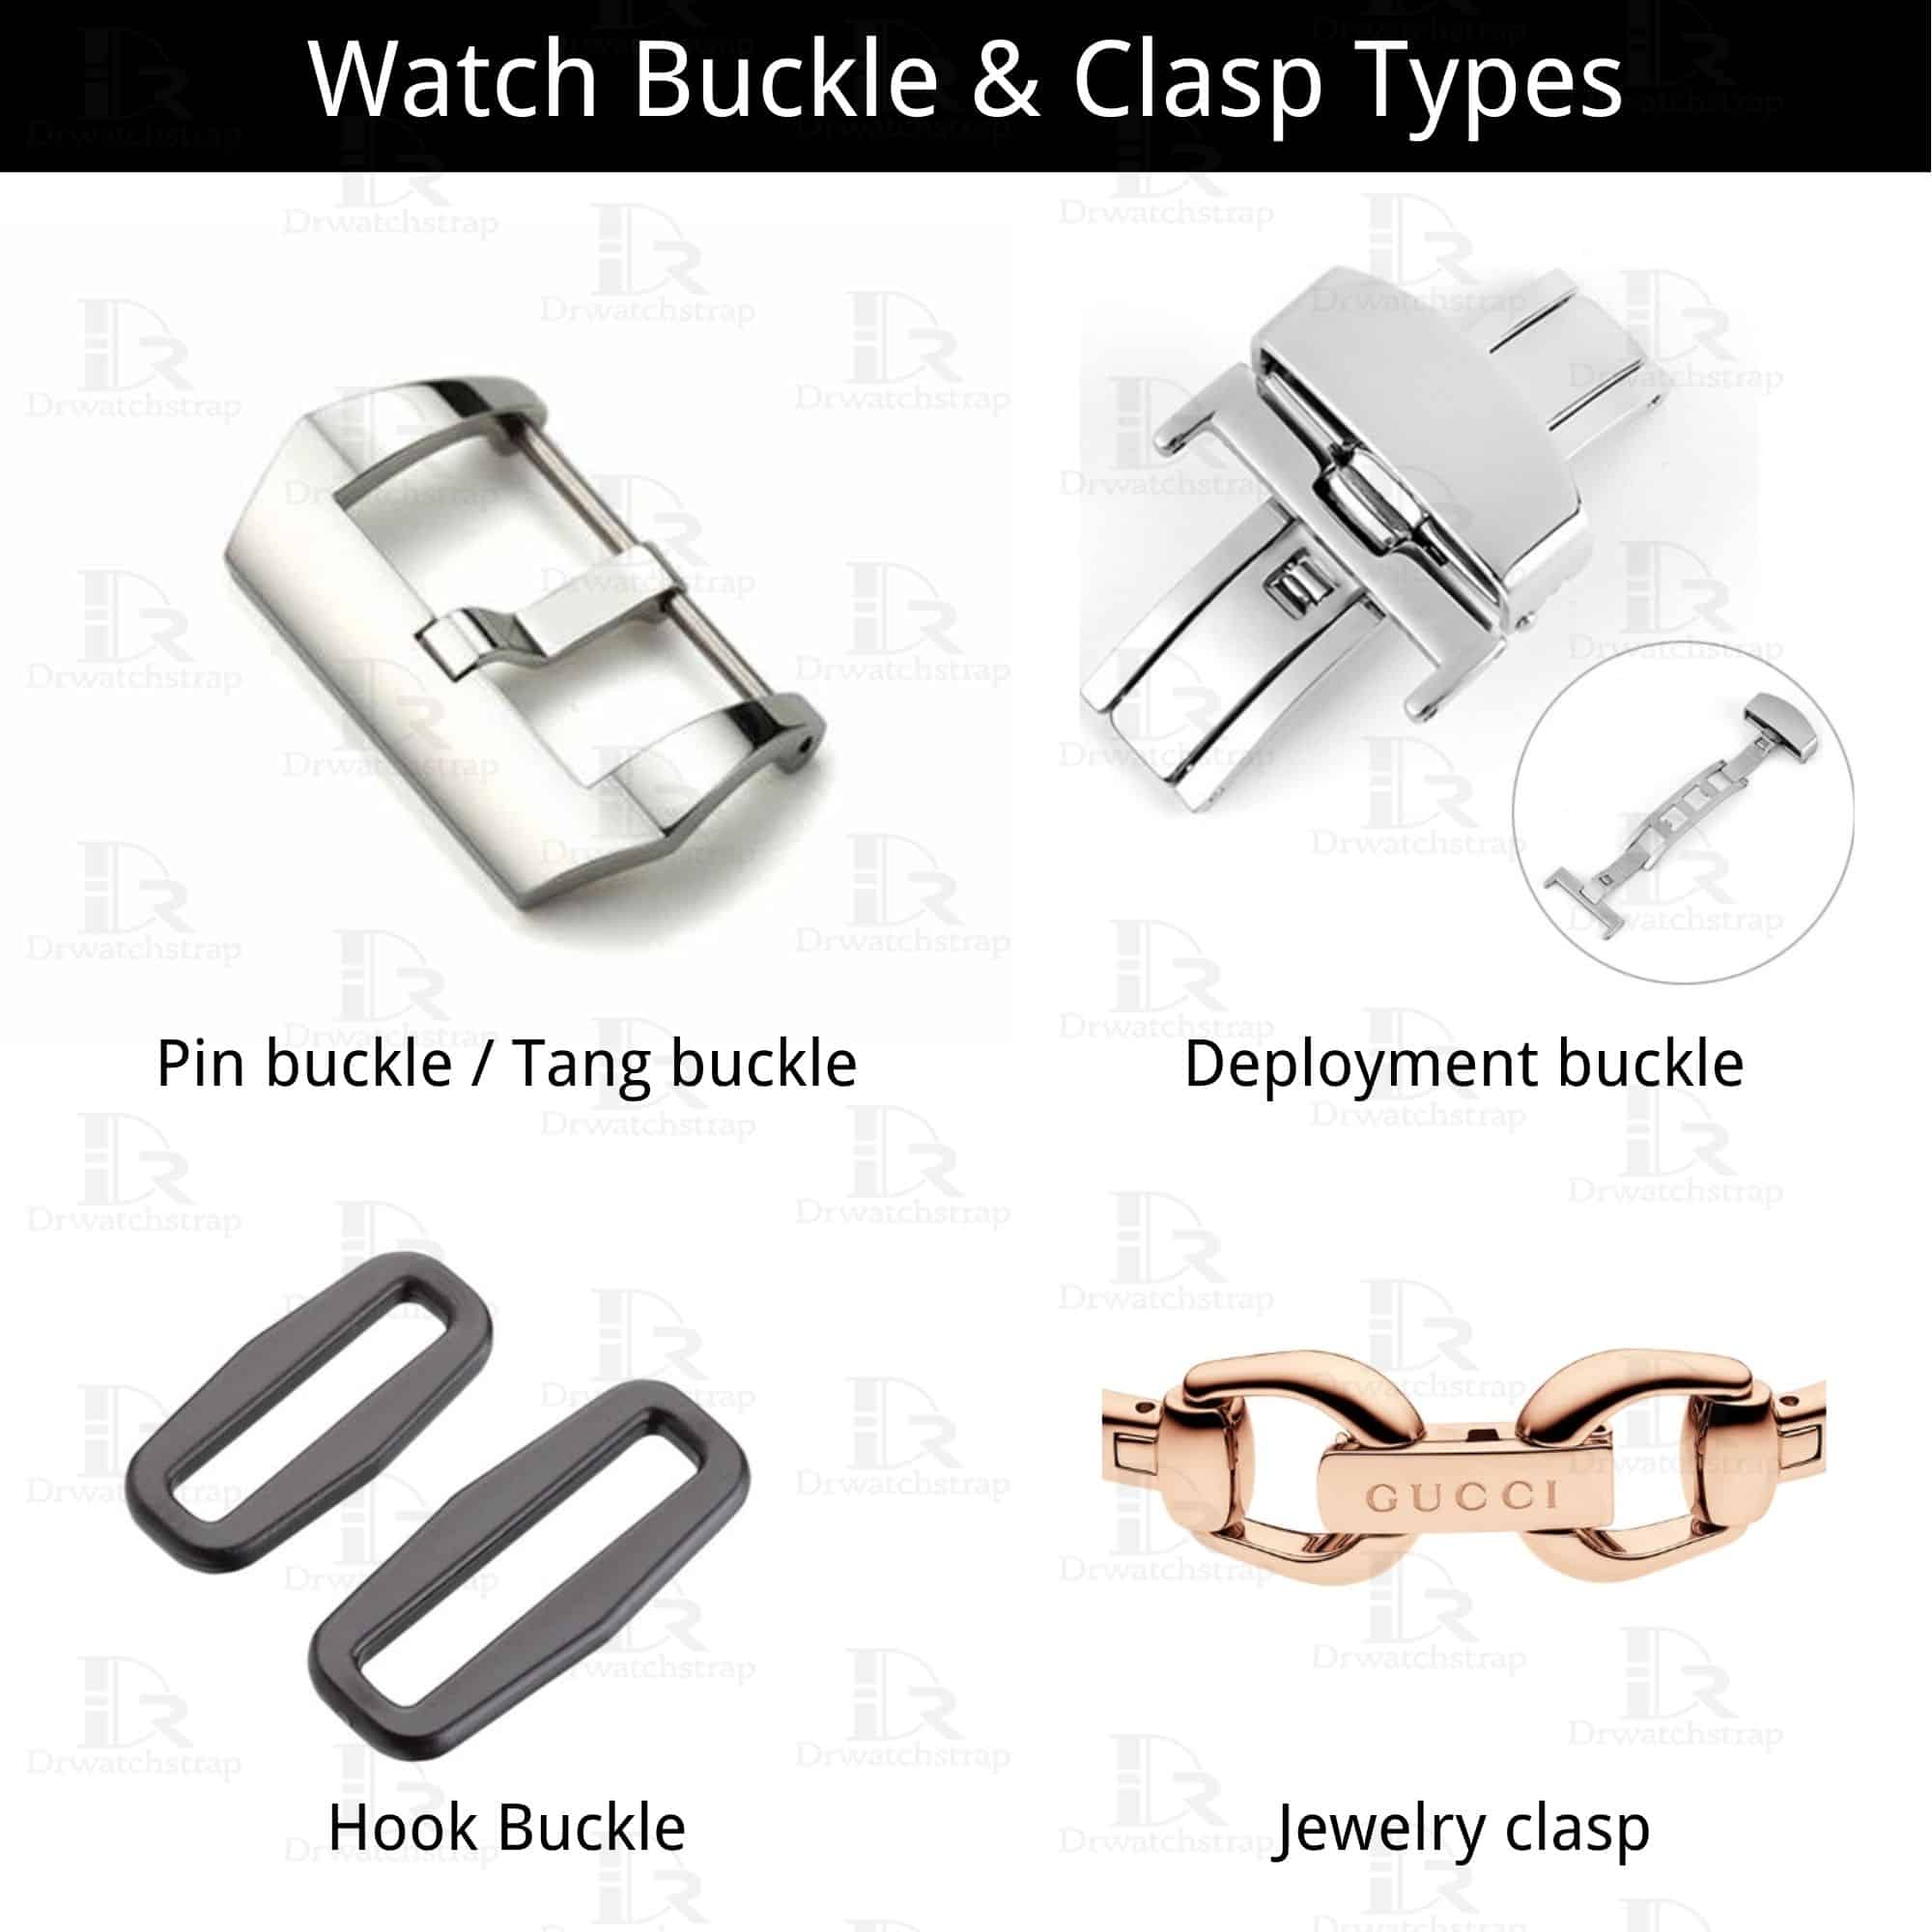 Clasp Wars: Magnetic Clasps